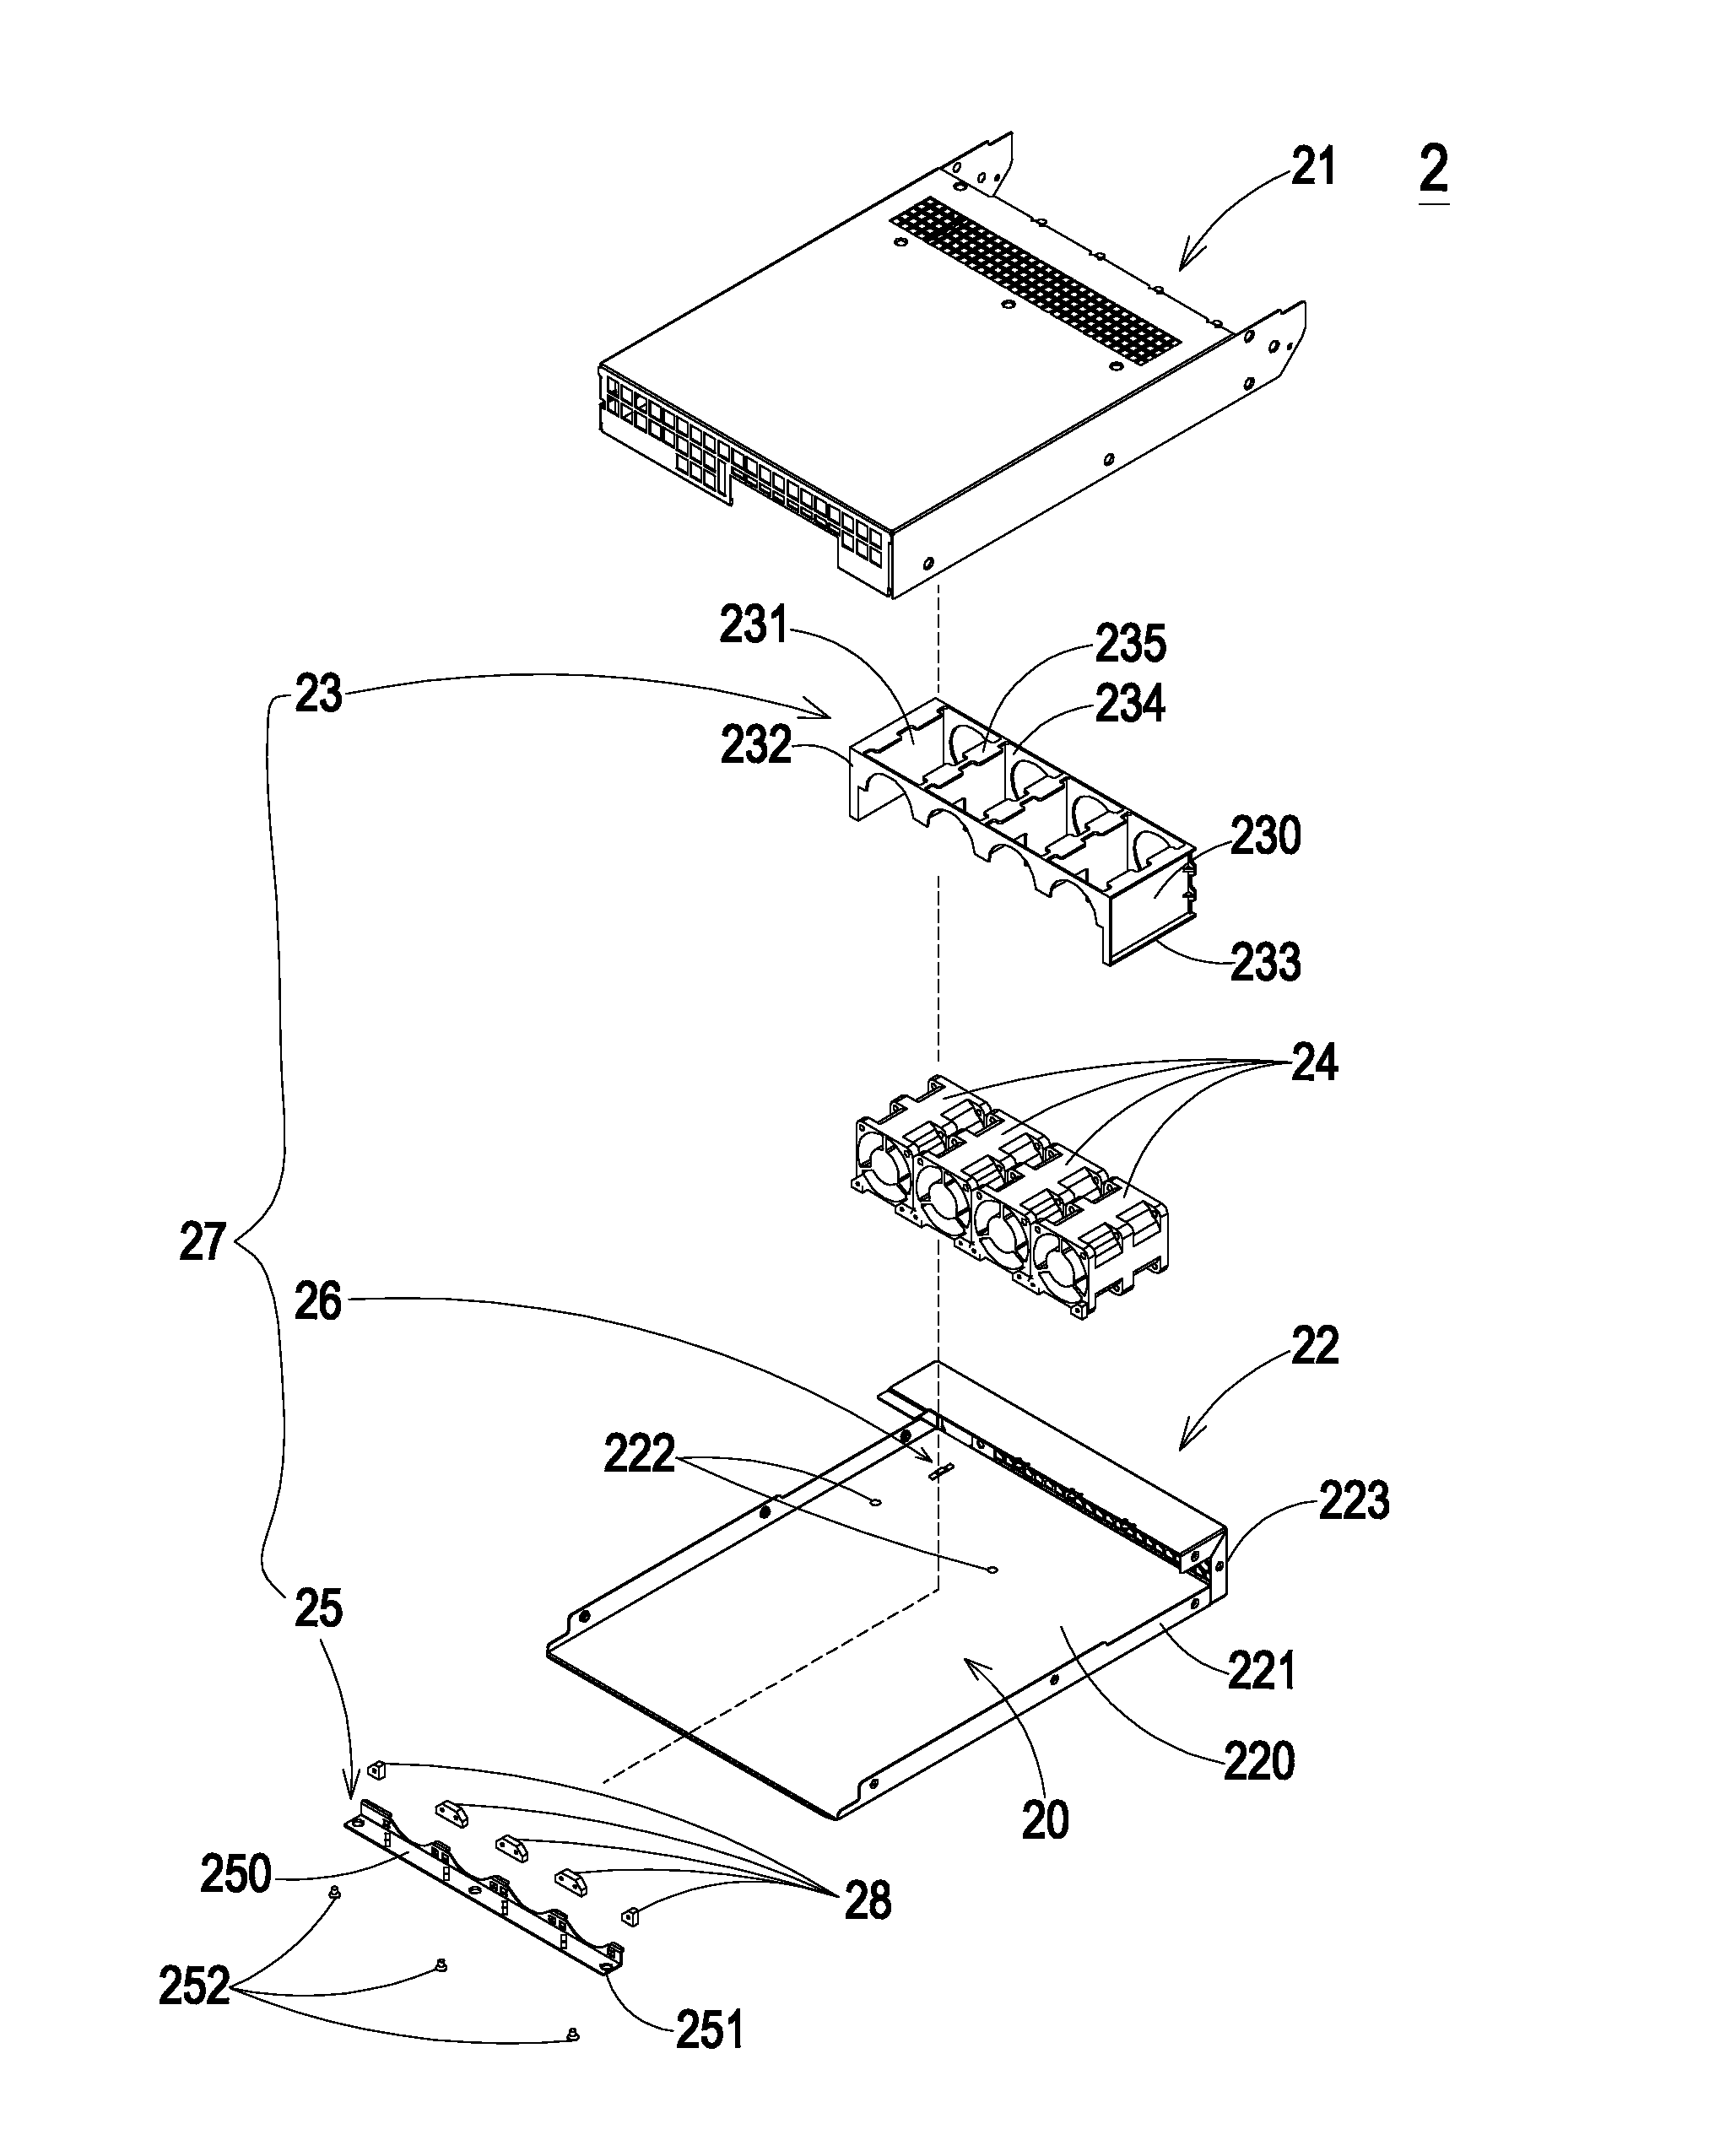 Case structure and fan frame fixing module